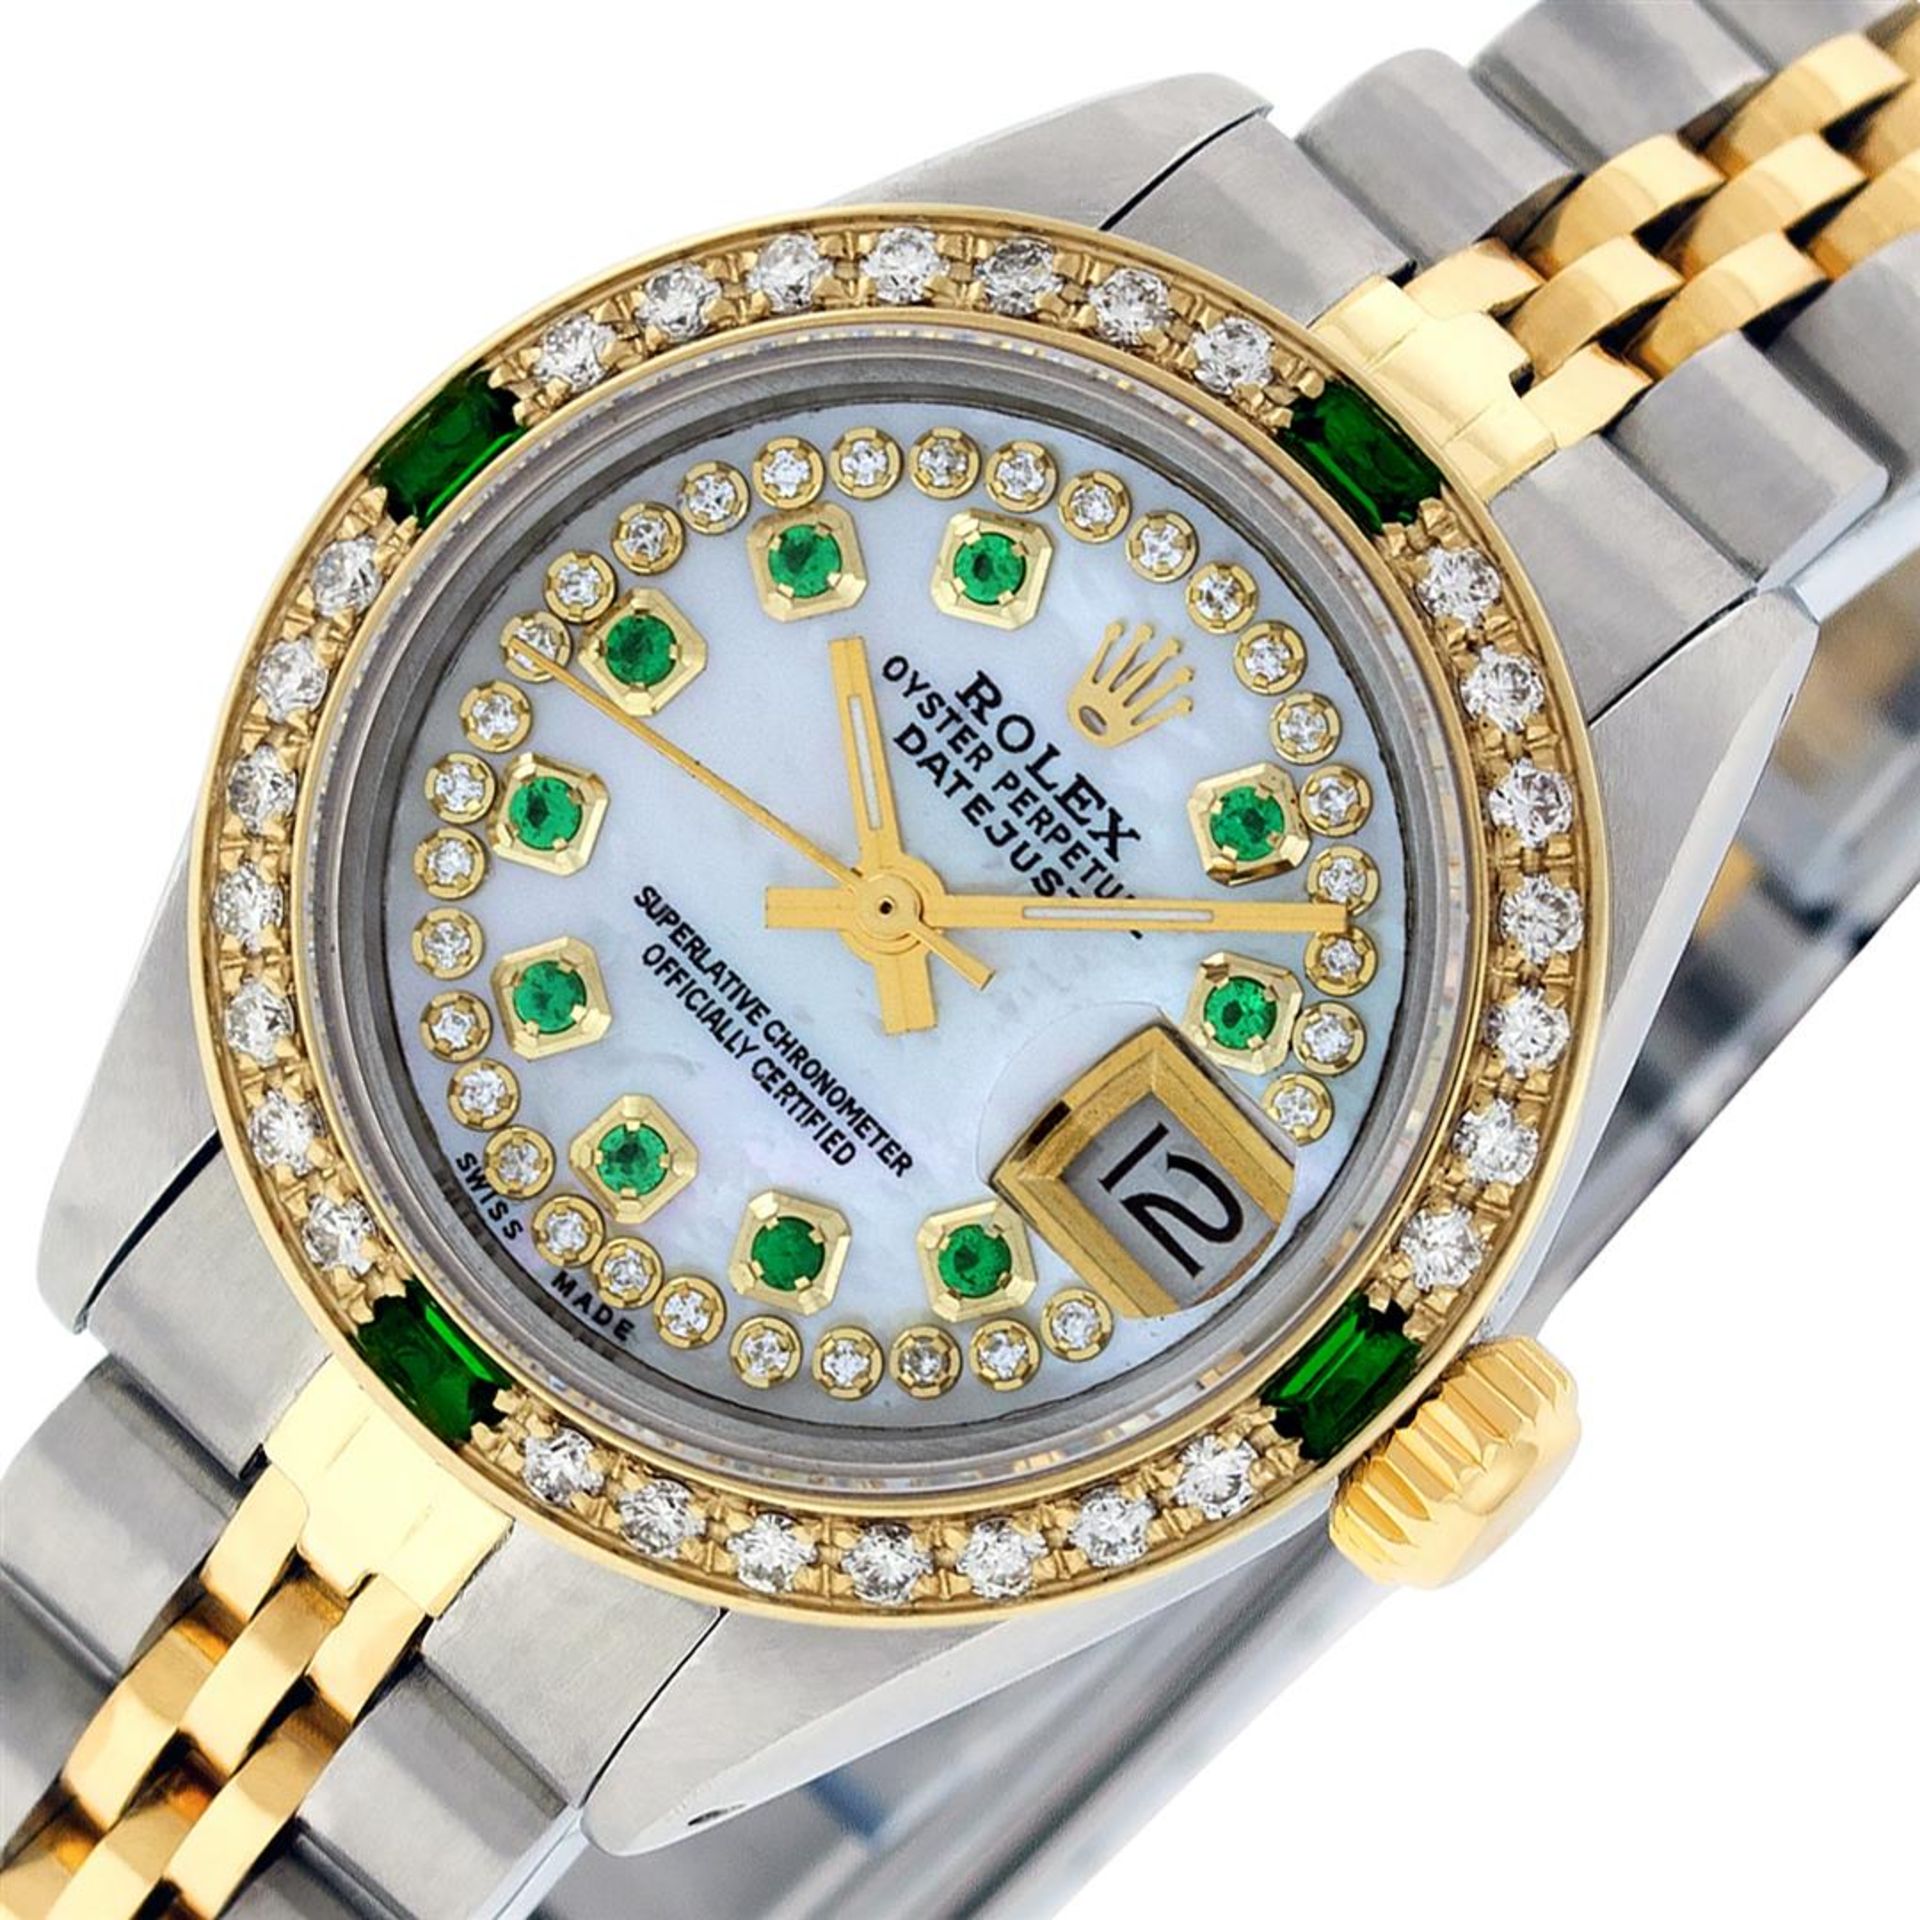 Rolex Ladies 2 Tone MOP Diamond & Emerald Datejust Oyster Perpetual Wristwatch - Image 3 of 9